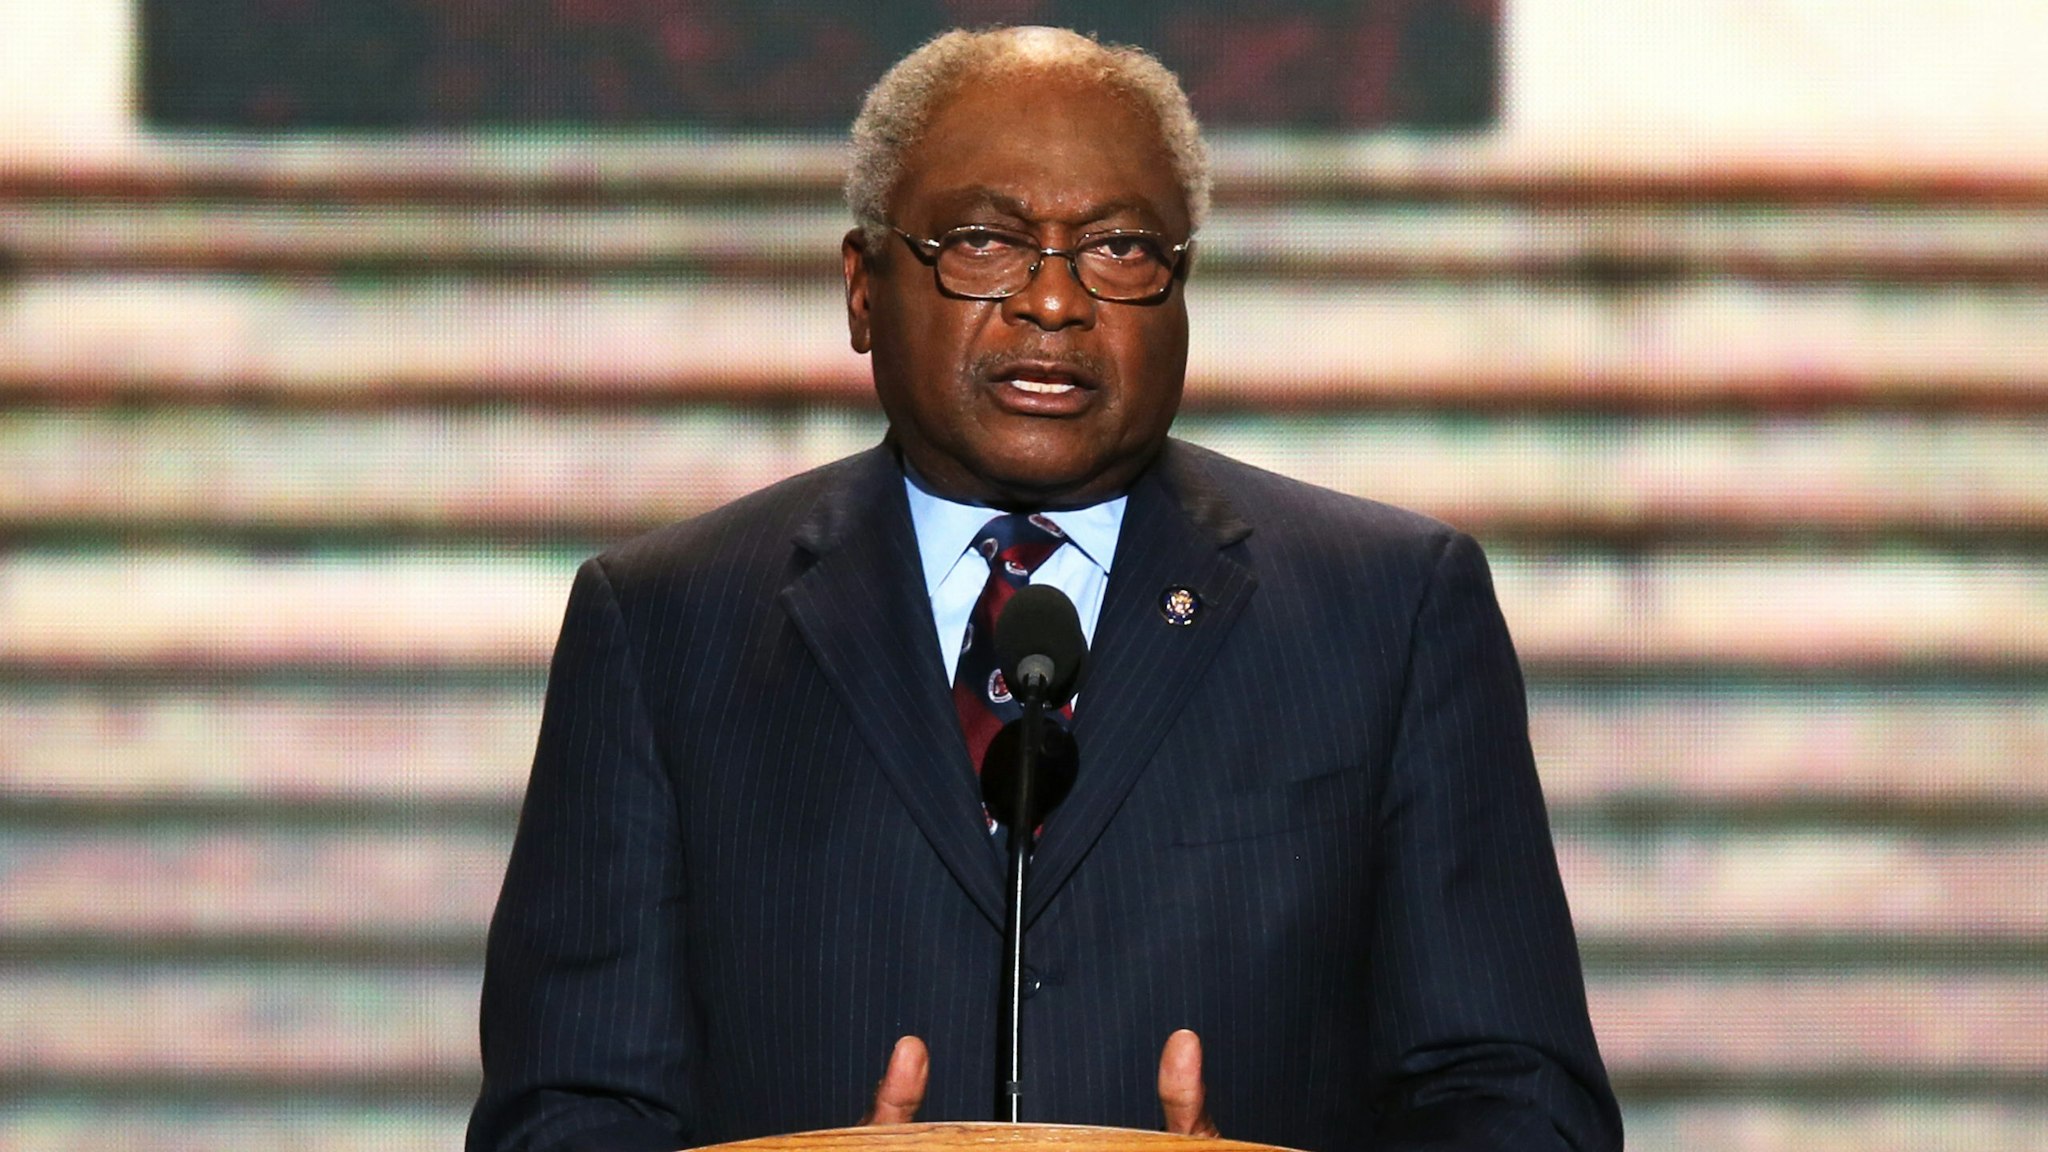 CHARLOTTE, NC - SEPTEMBER 06: Assistant Democratic Leader, U.S. Rep. James E. Clyburn (D-SC) speaks on stage during the final day of the Democratic National Convention at Time Warner Cable Arena on September 6, 2012 in Charlotte, North Carolina. The DNC, which concludes today, nominated U.S. President Barack Obama as the Democratic presidential candidate.